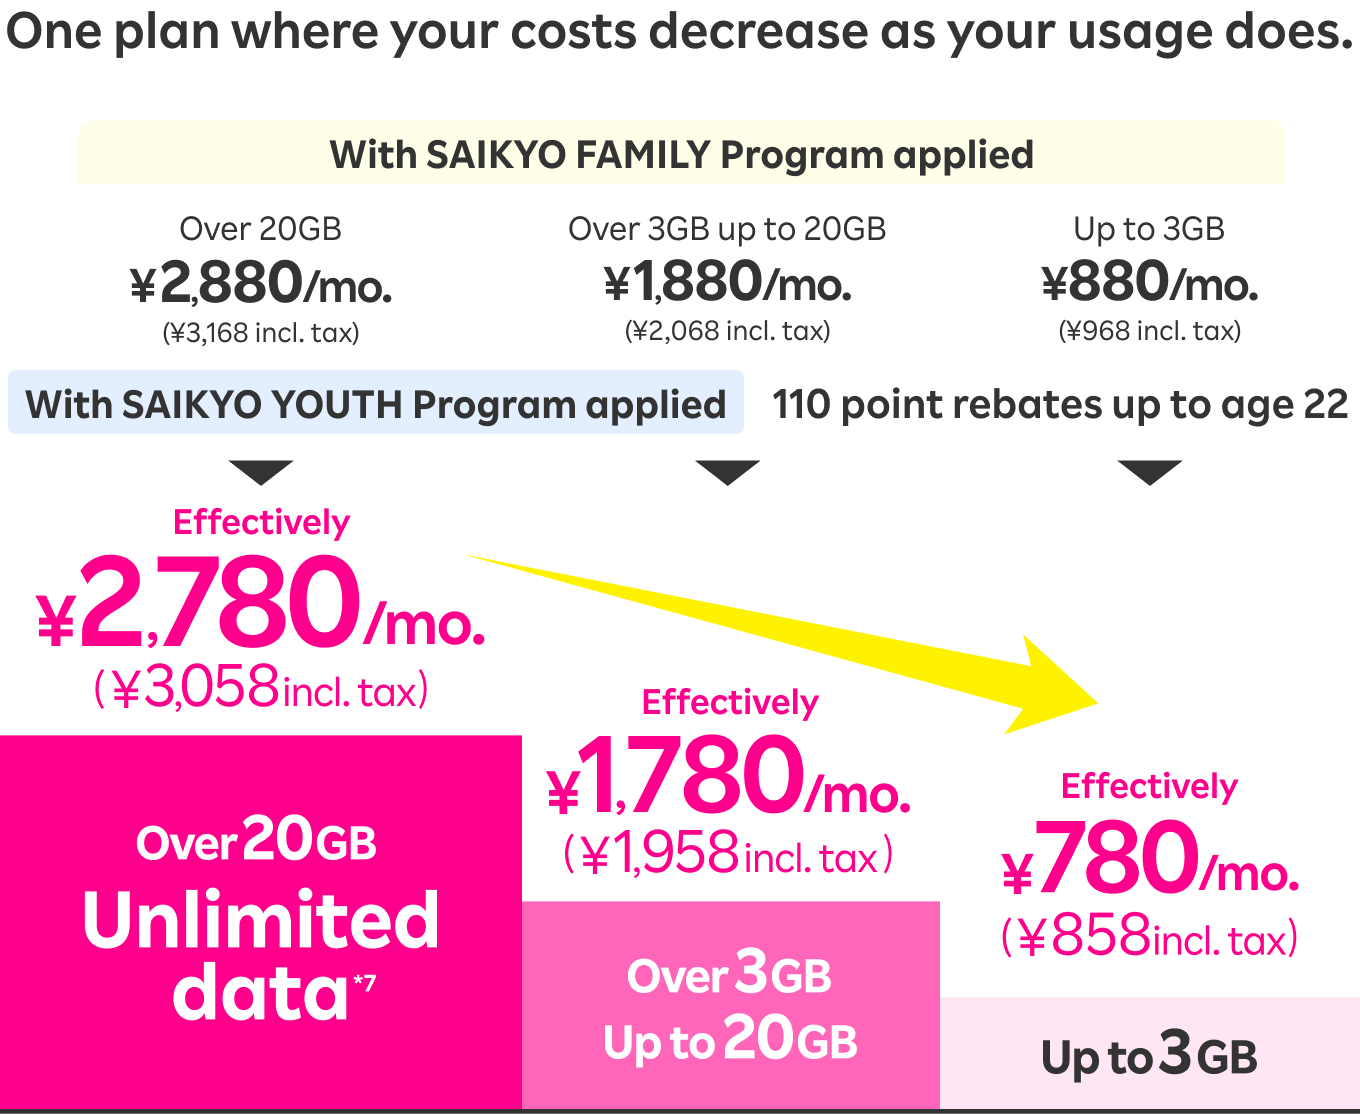 With SAIKYO FAMILY Program applied, ¥2,880/mo. (¥3,168 incl. tax) over 20GB, ¥1,880/mo. (¥2,068 incl. tax) Over 3GB up to 20GB, and ¥880/mo. (¥968 incl. tax) up to 3GB.